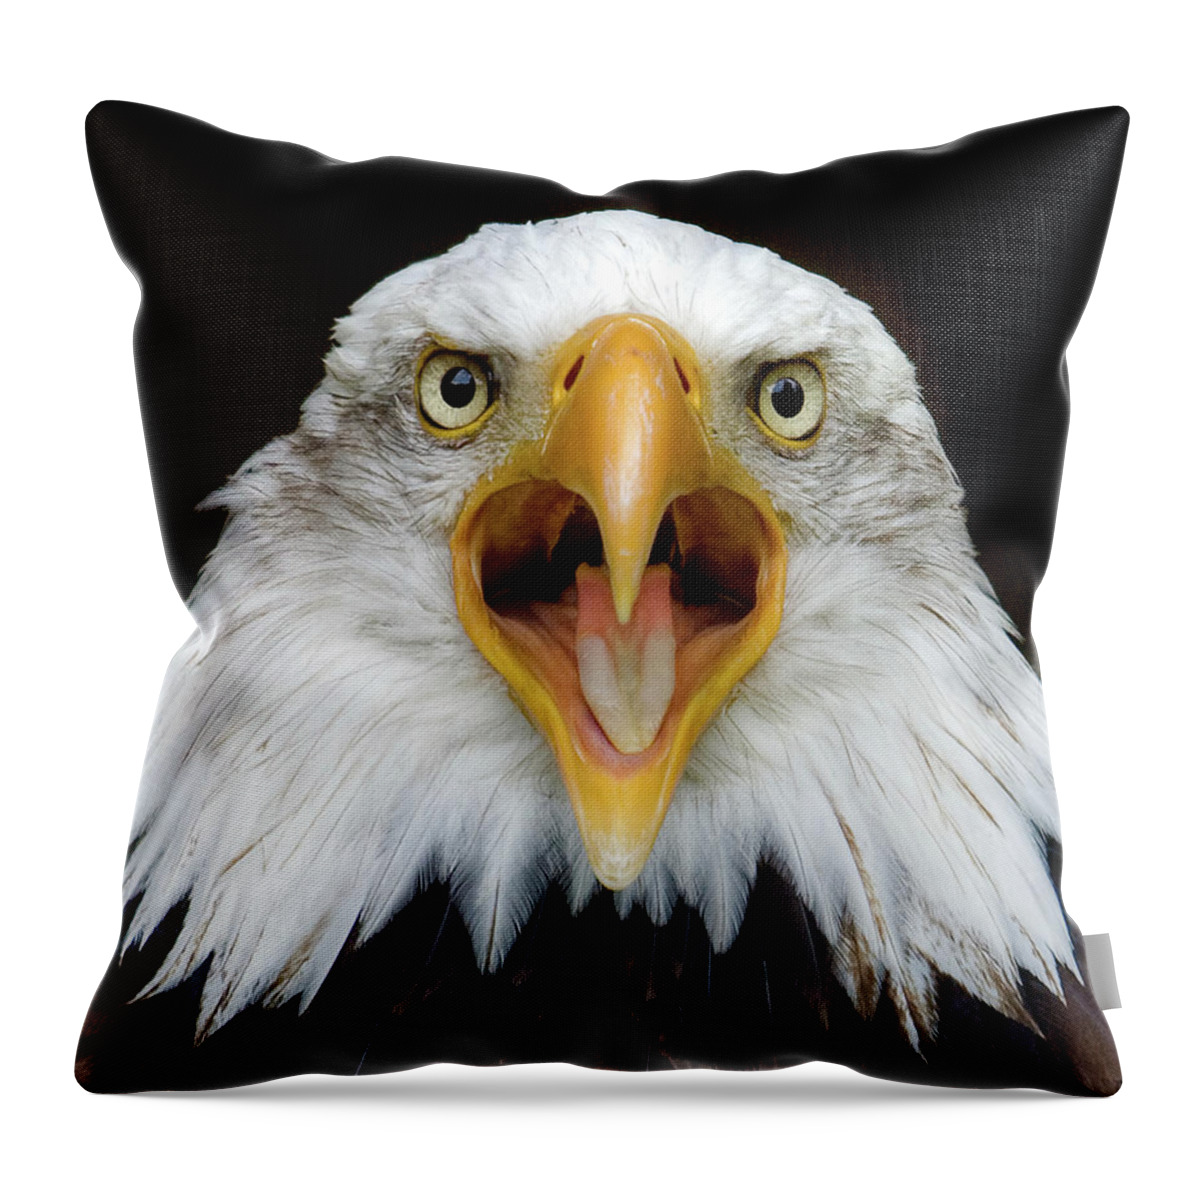 Animal Themes Throw Pillow featuring the photograph Bald Eagle by Www.galerie-ef.de